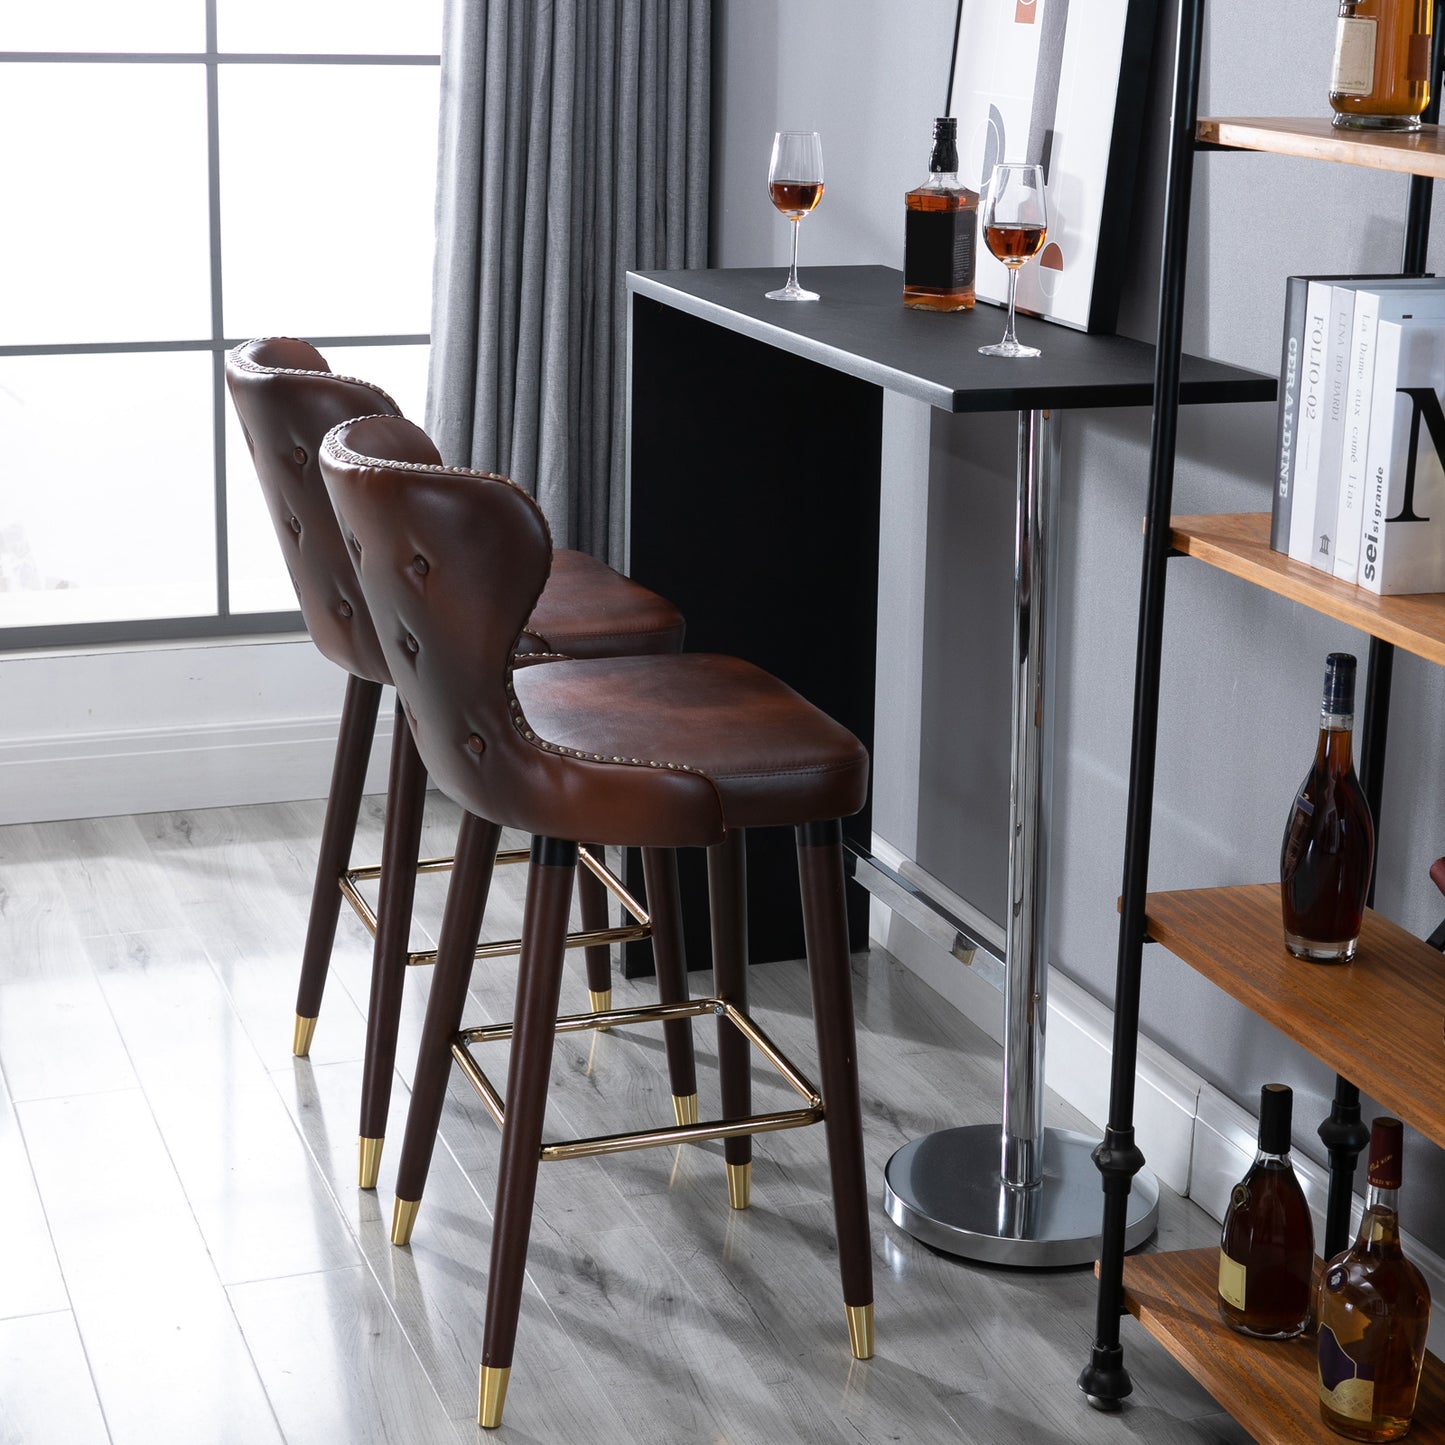 HOMCOM Bar Stools Set of 2, PU Leather Vintage Counter-Height Bar Chair, Luxury European Style Kitchen Stools with Back, Brown